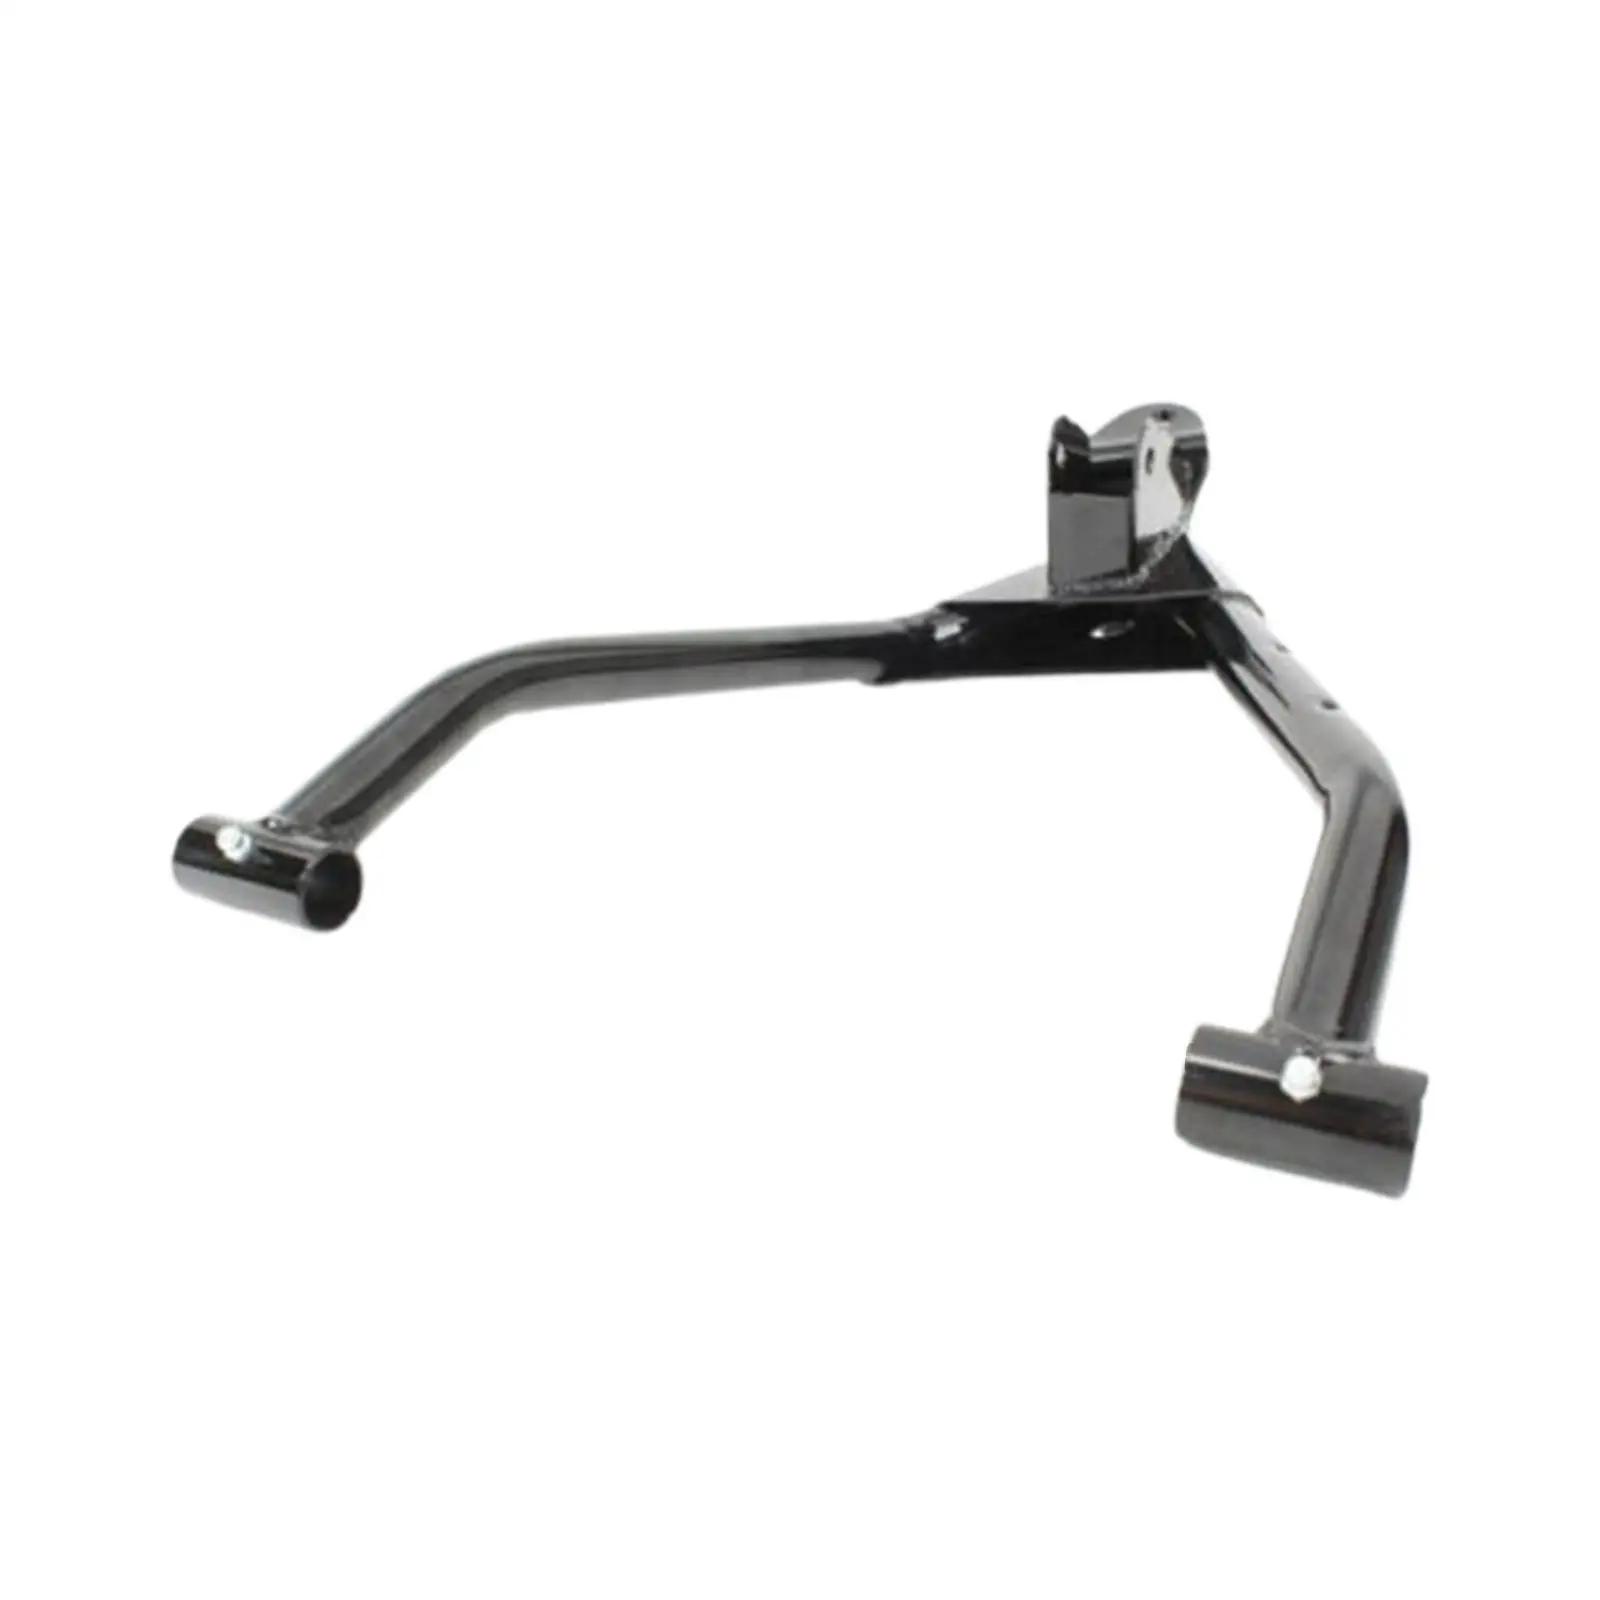 Front Control Arm Assembly Durable for Polaris RZR 170 2009-2021 ATV Spare Parts Good Performance Convenient Installation